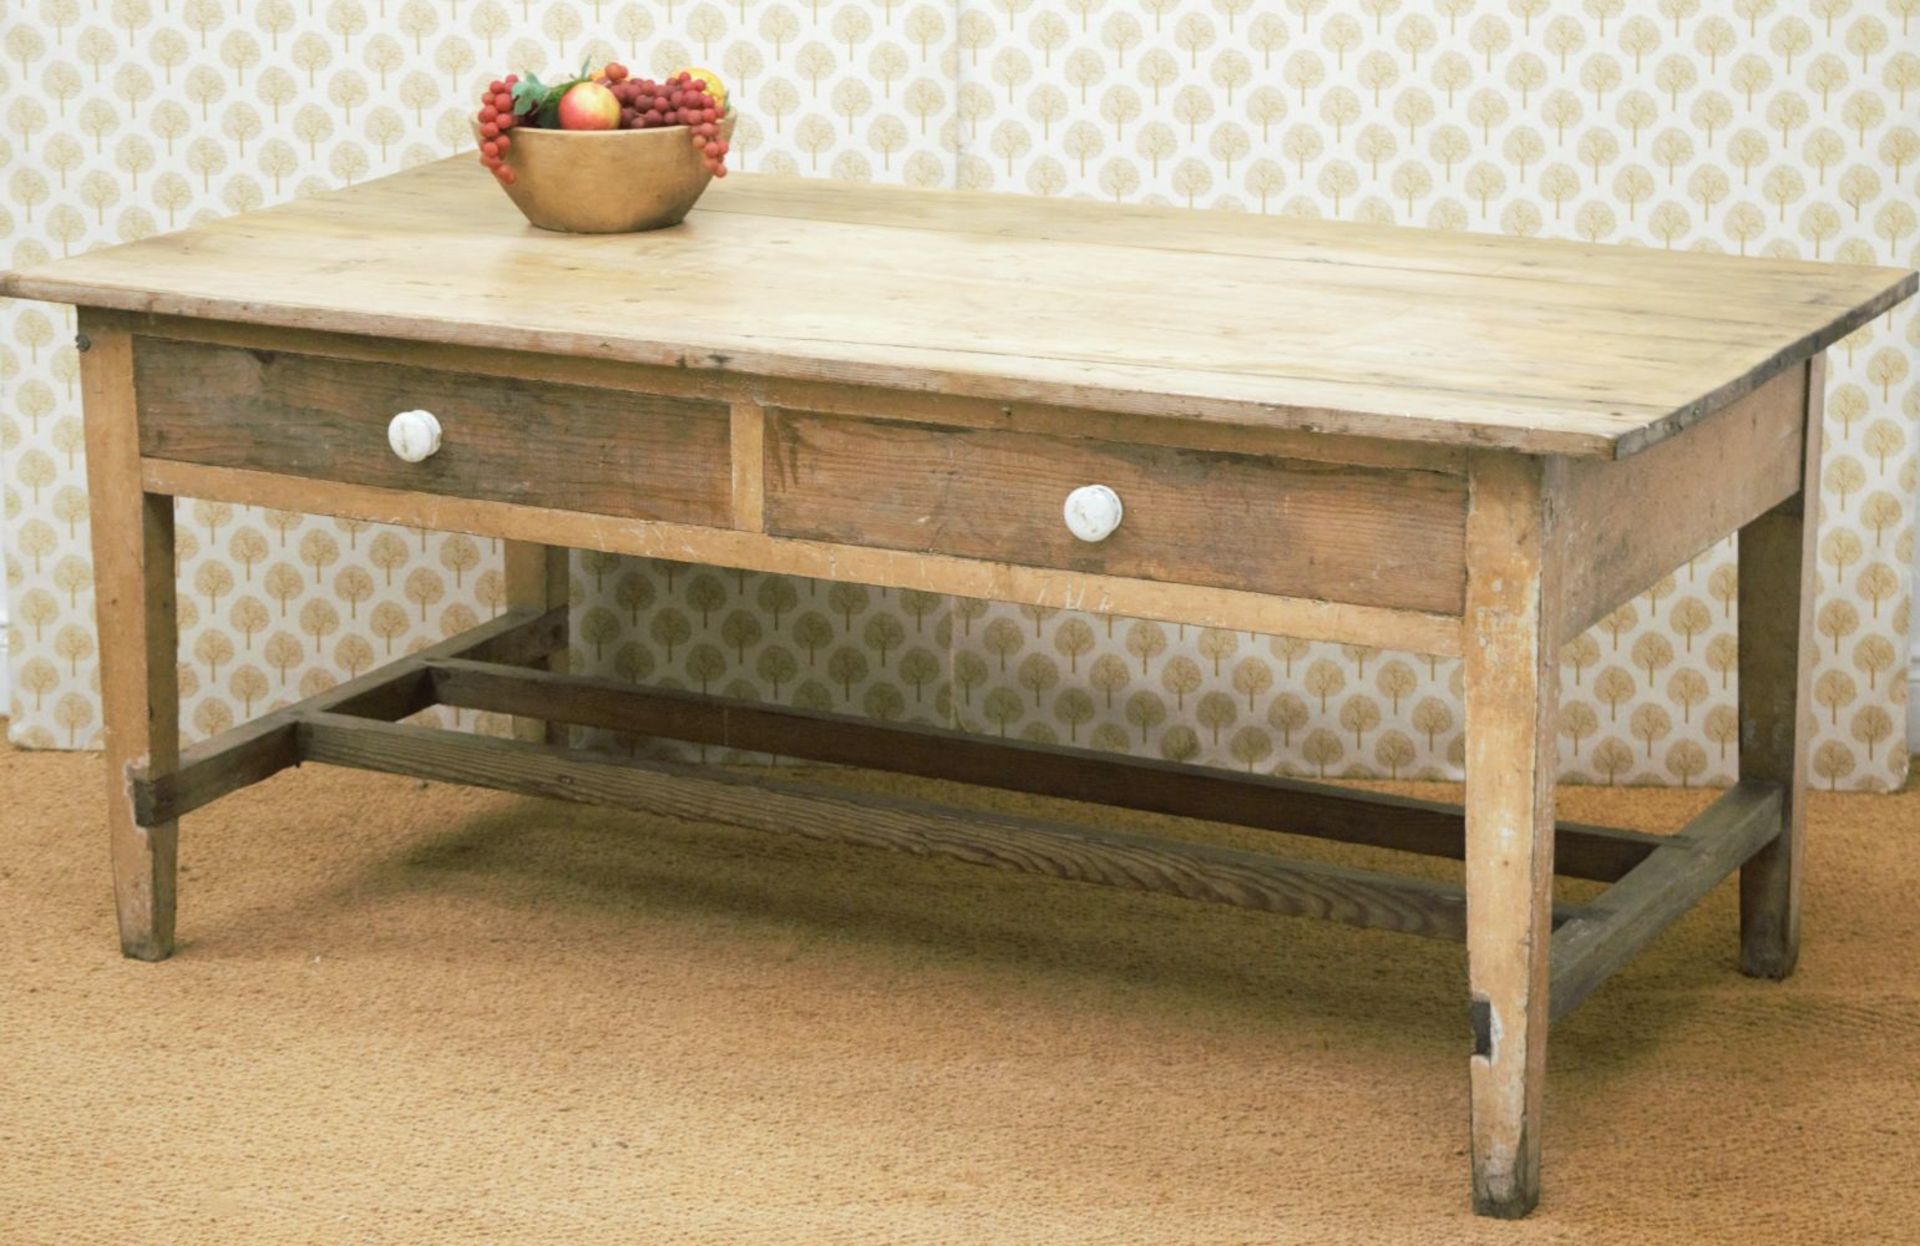 LARGE 19TH-CENTURY PINE COUNTRY KITCHEN TABLE